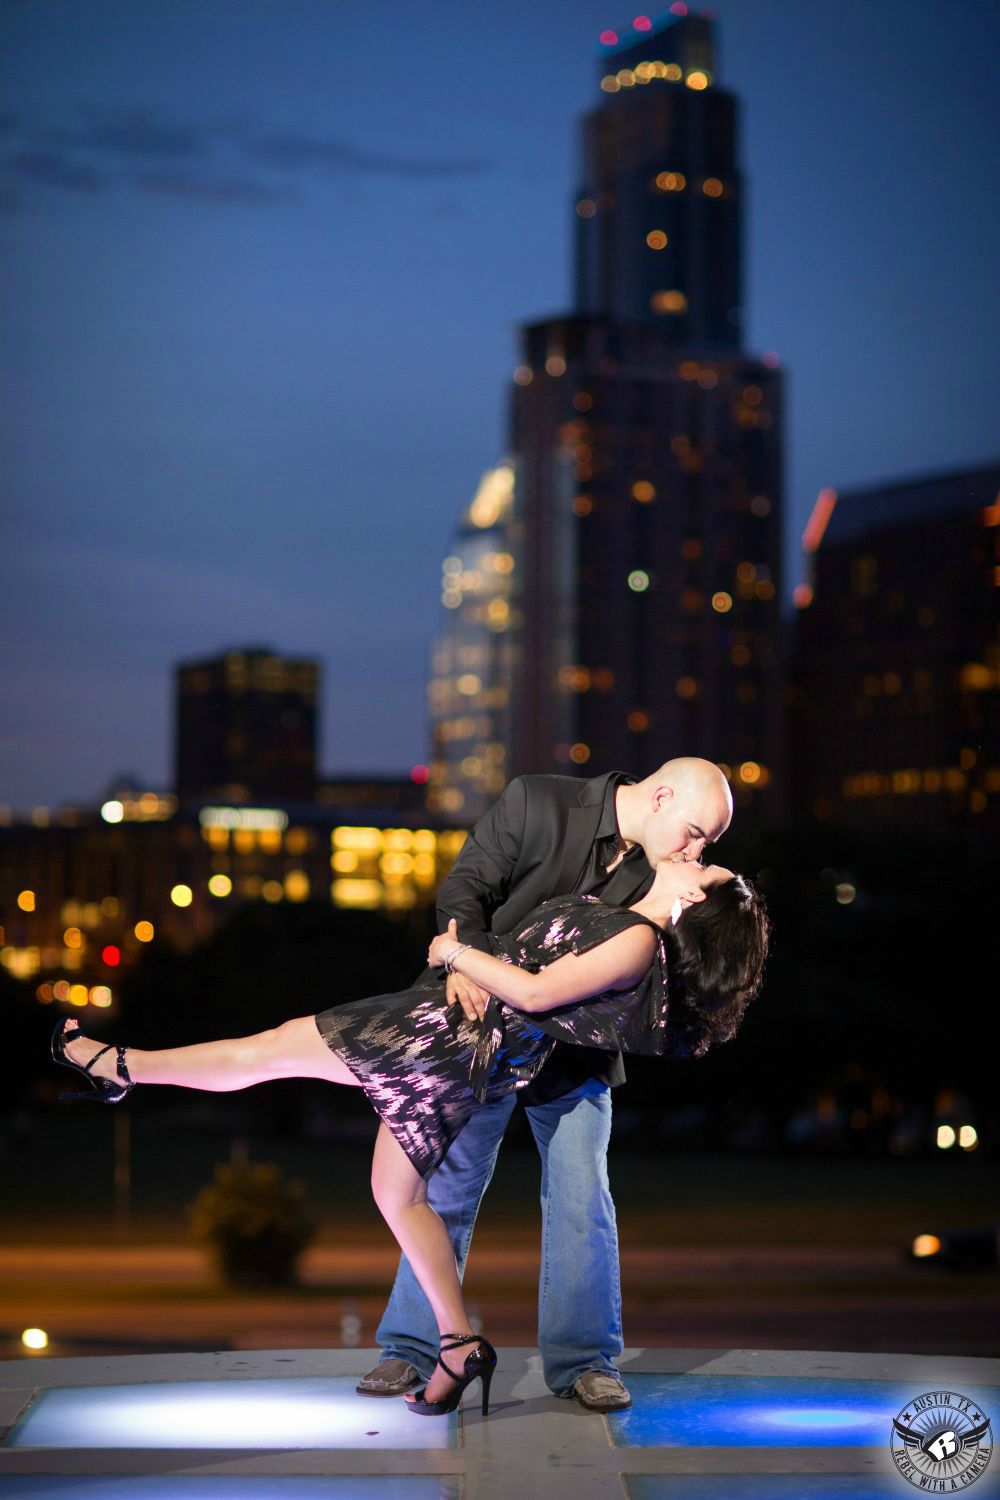 latino guy with shaved head and black shirt and blue jeans dips brunette girl in purple and black dress and black high heals on a lit up floor in front of the skyline of austin at night with a blue and purple sky in this engagement portrait 